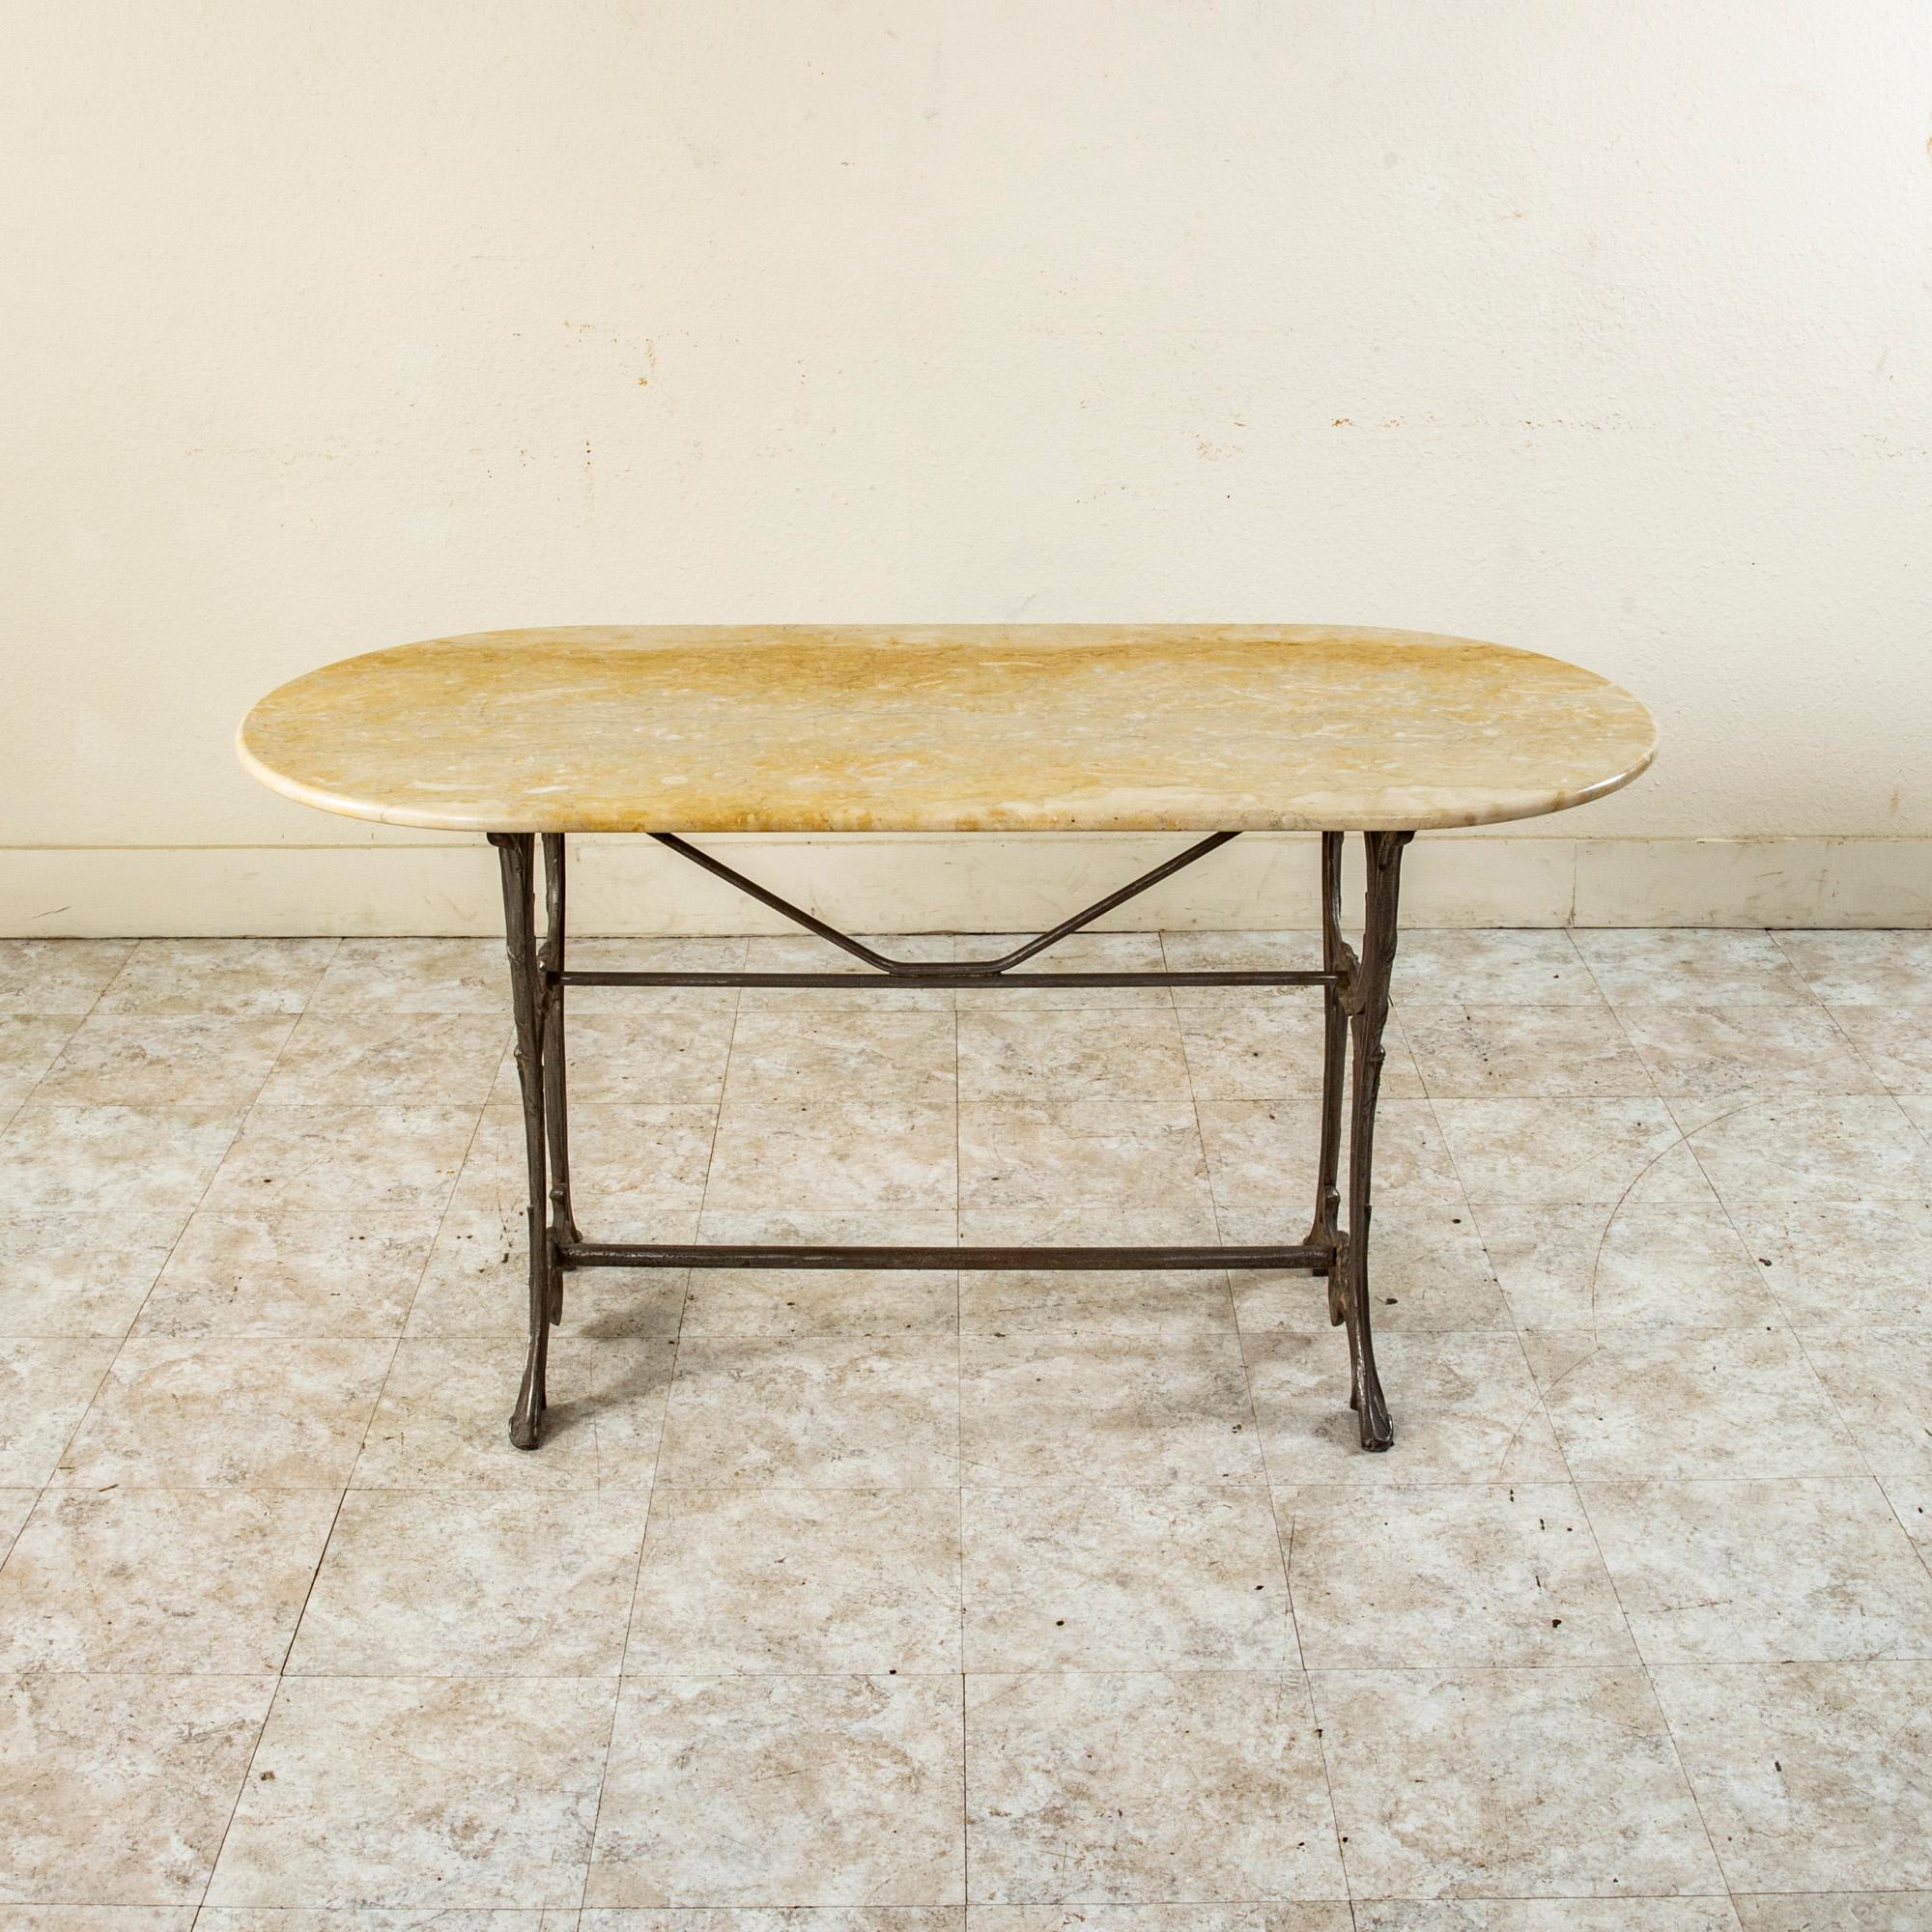 This French Art Nouveau Period iron bistro table from the turn of the twentieth century features an oval marble top. The base of the table is detailed with classic Art Nouveau scrolling leaves and shells. The legs are joined by two stretchers. The